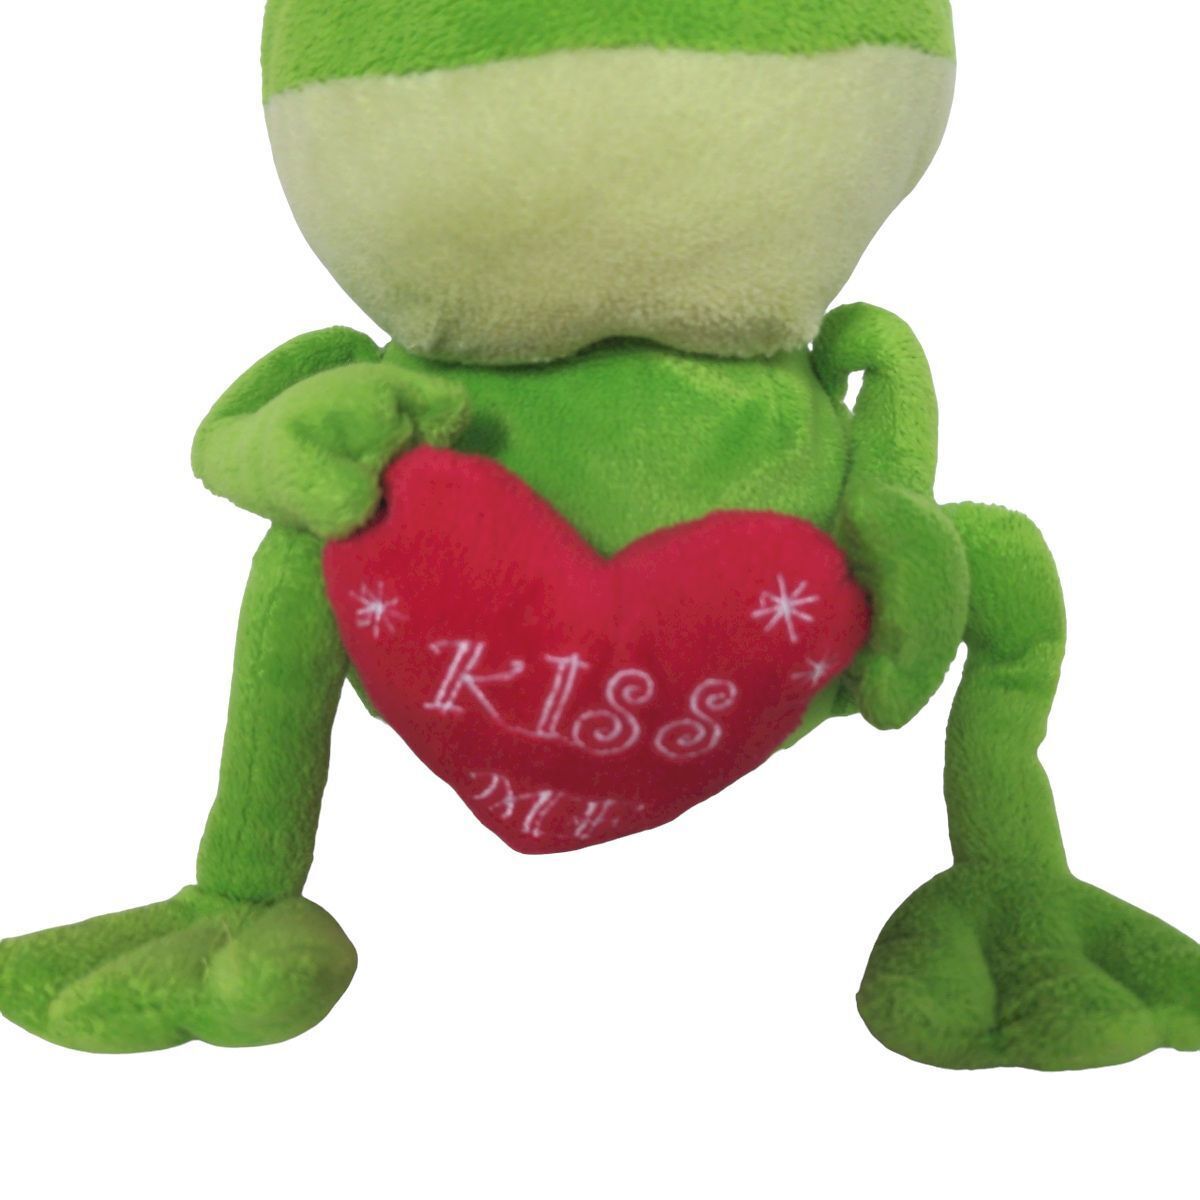 Primary image for Animal Adventure Valentine Green Frog Kiss Me Heart Stuffed Animal 2013 9.5"